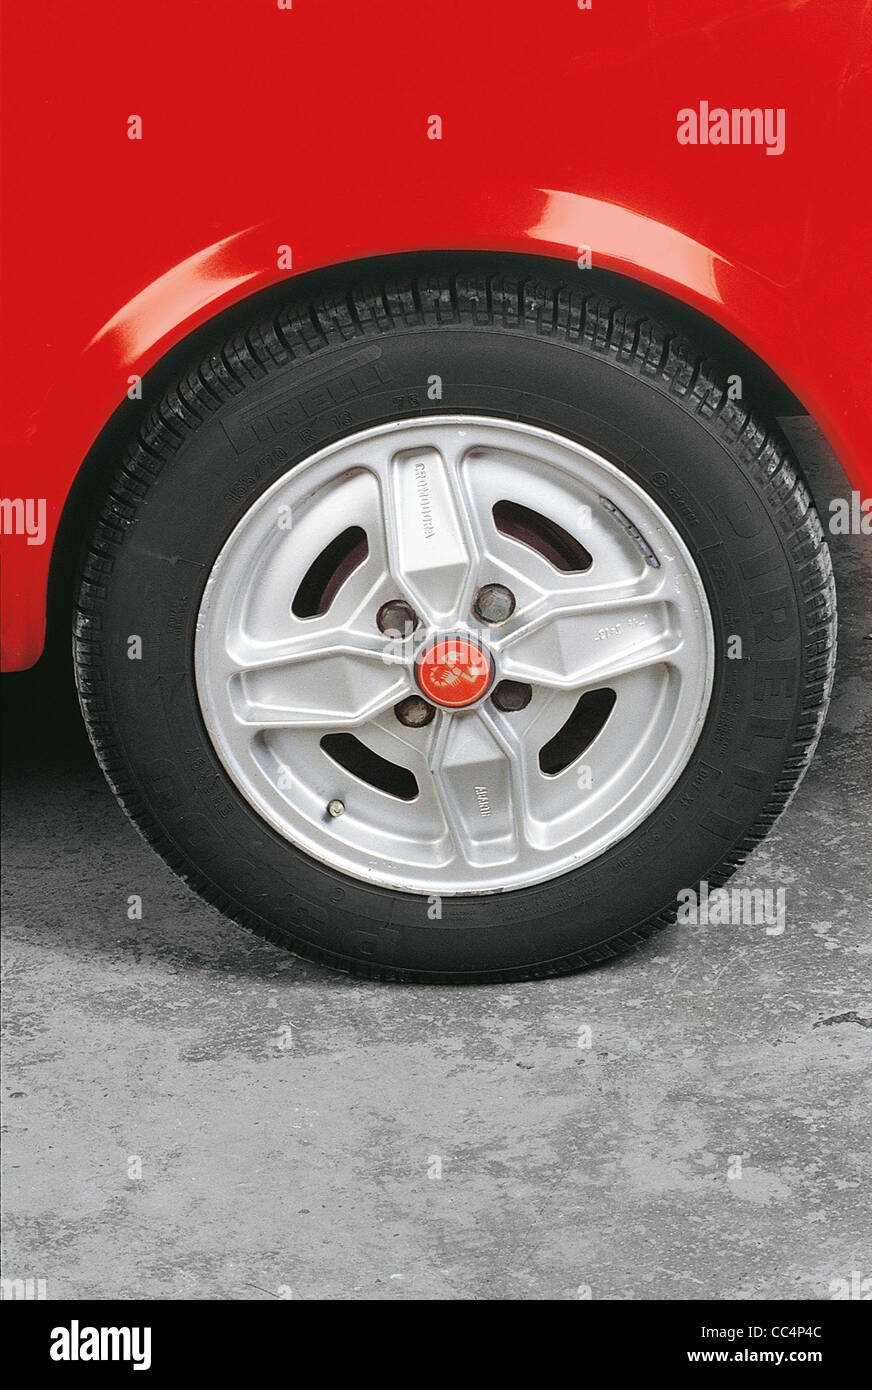 Cars Twentieth Century Italy. Auto Autobianchi A112 Abarth 58 Hp. Year 1974. Detail Of The Rear Wheel With Alloy Rim Stock Photo